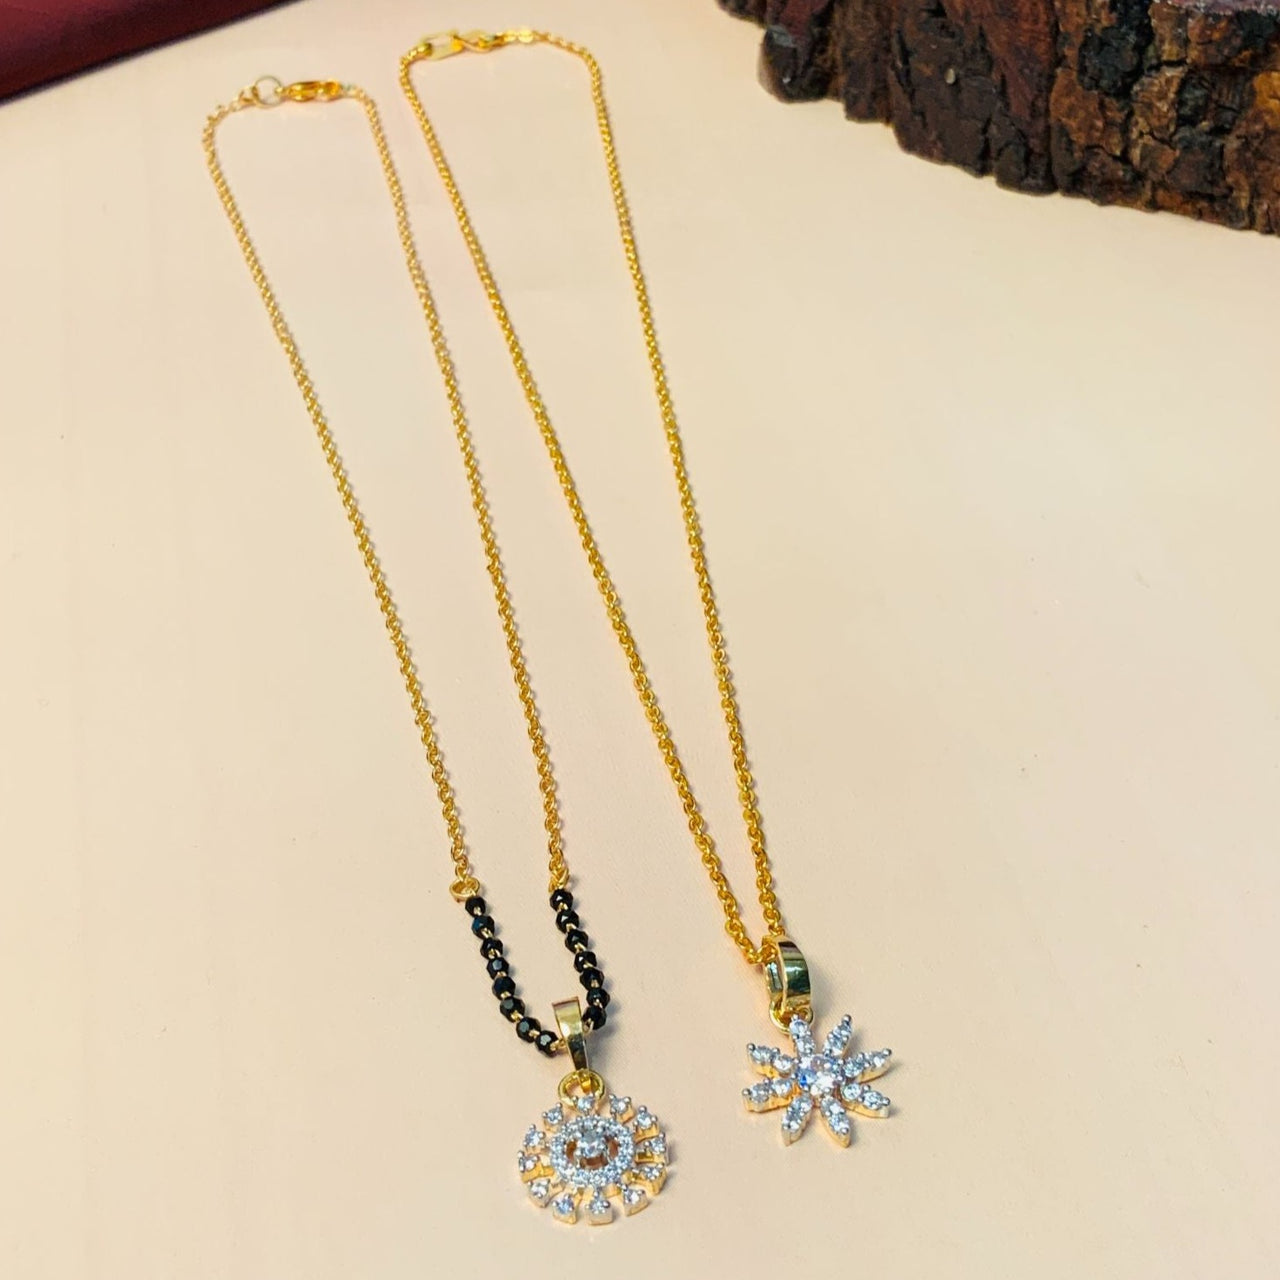 Fascinating Gold Plated American Diamond Mangalsutra & Pendant Chain Combo